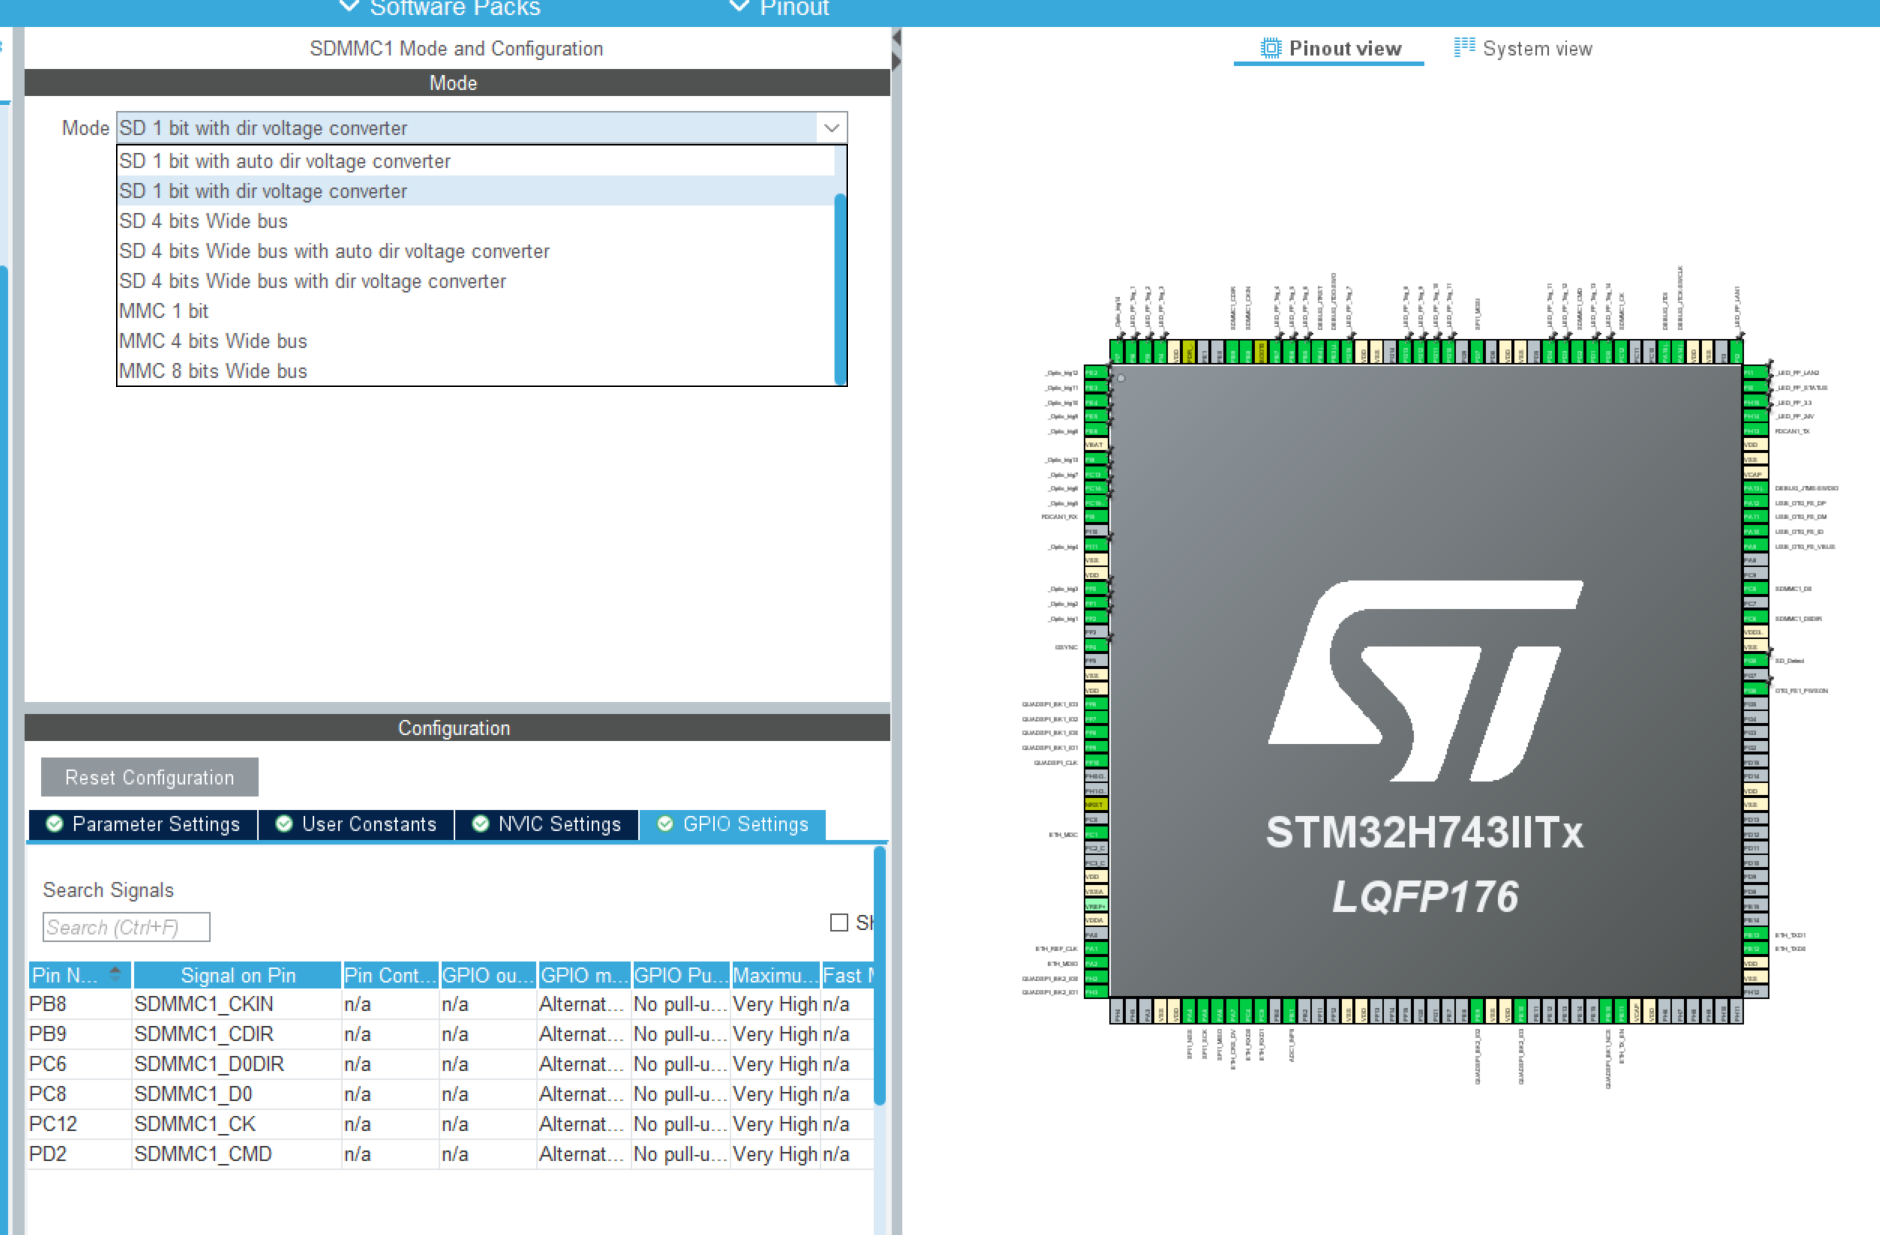 Re: Connecting SD CARD to STM32H743 without level translator